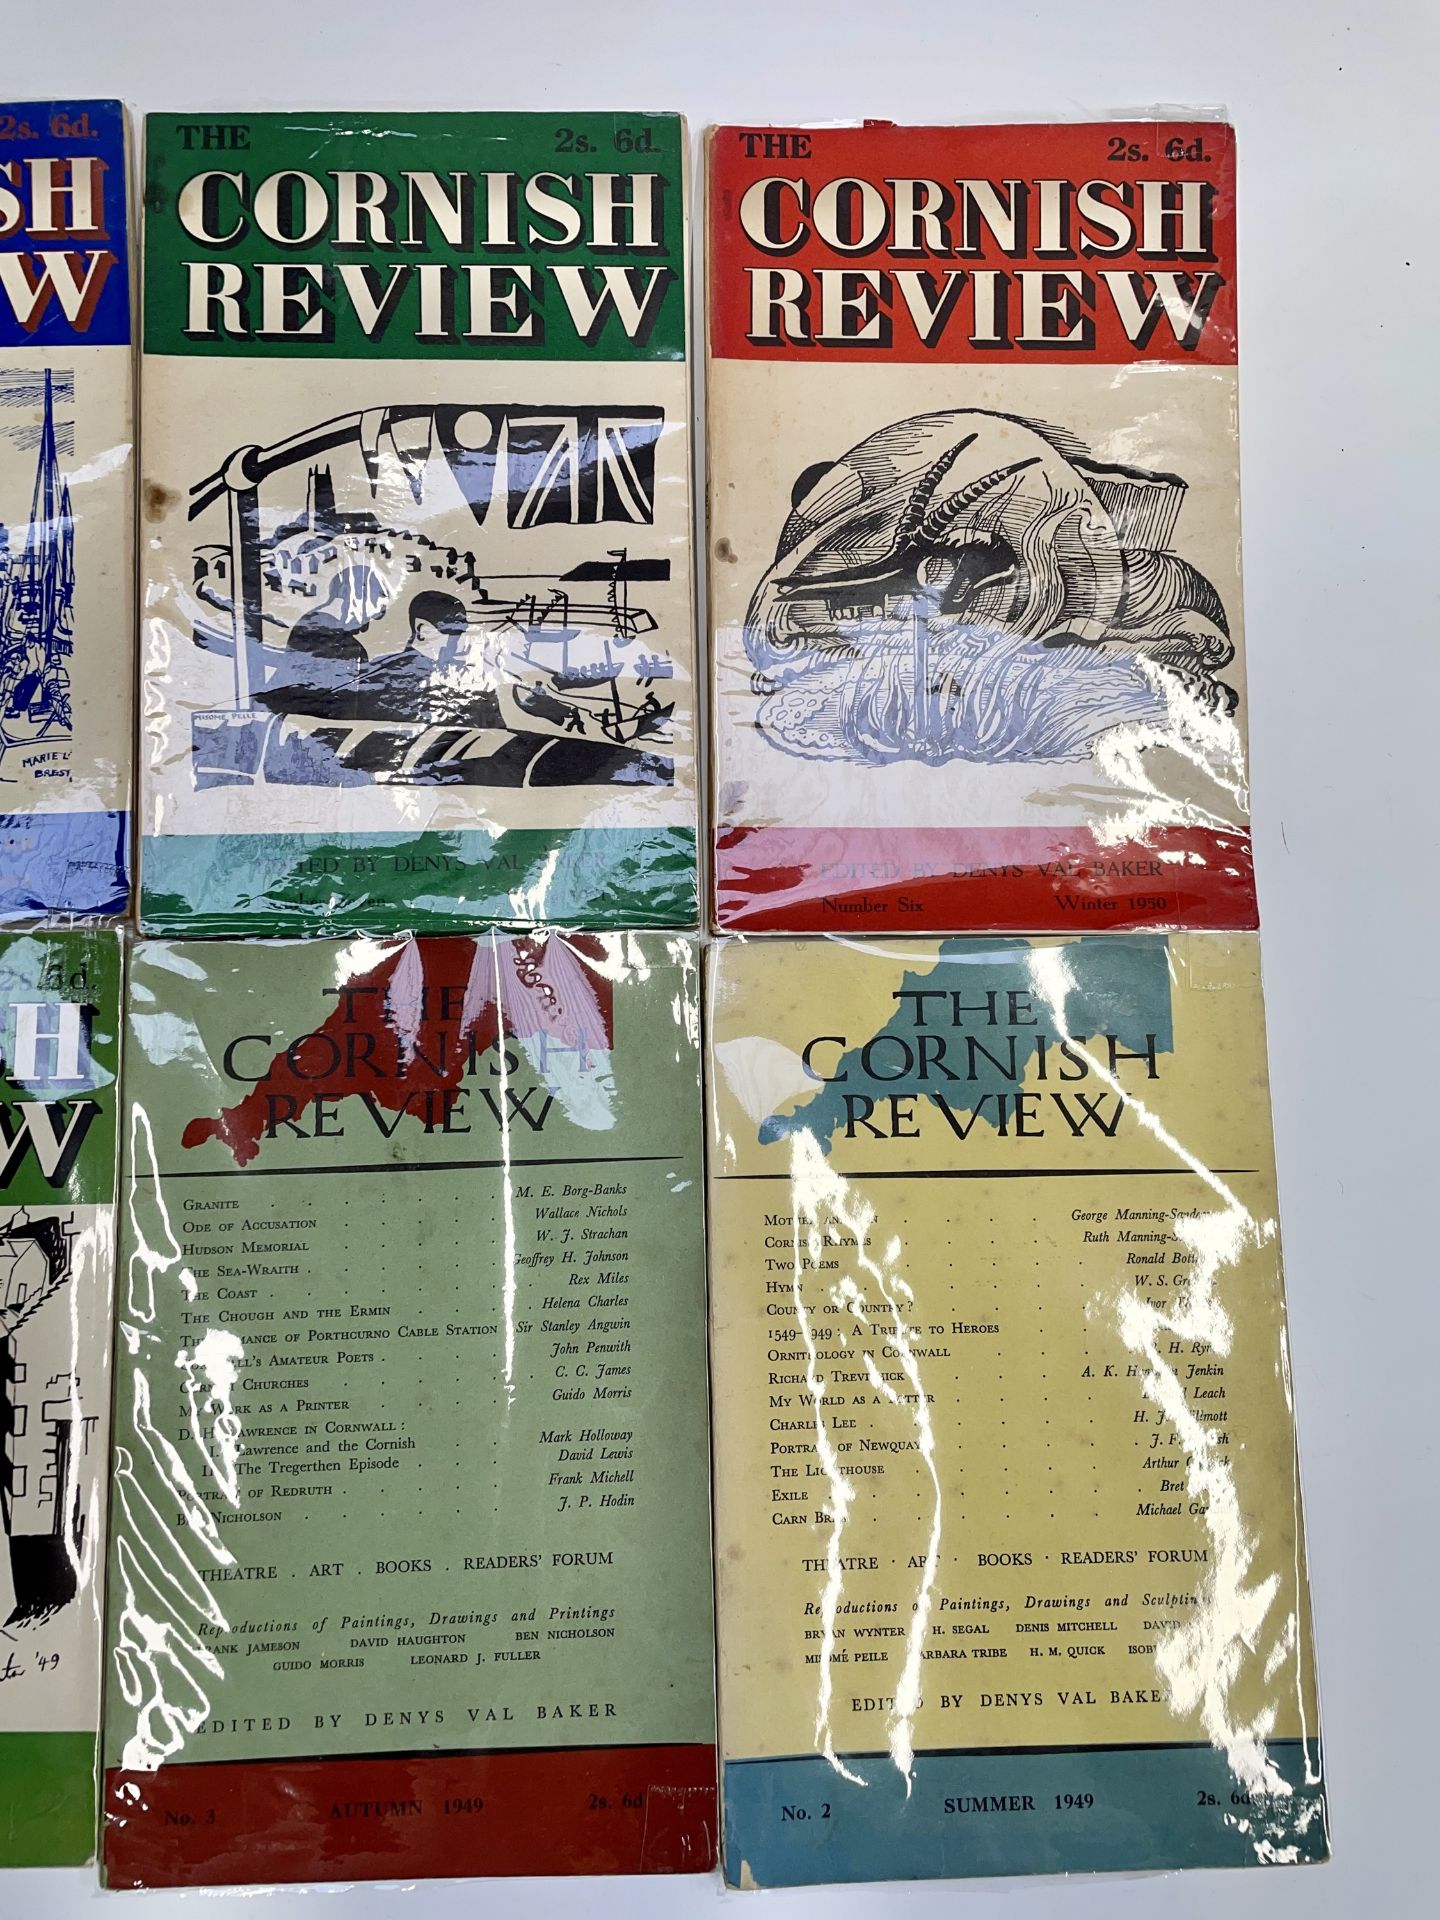 'The Cornish Review,' first nine issues, edited by Denys Val Baker, illustrated boards, cellophane - Image 7 of 7